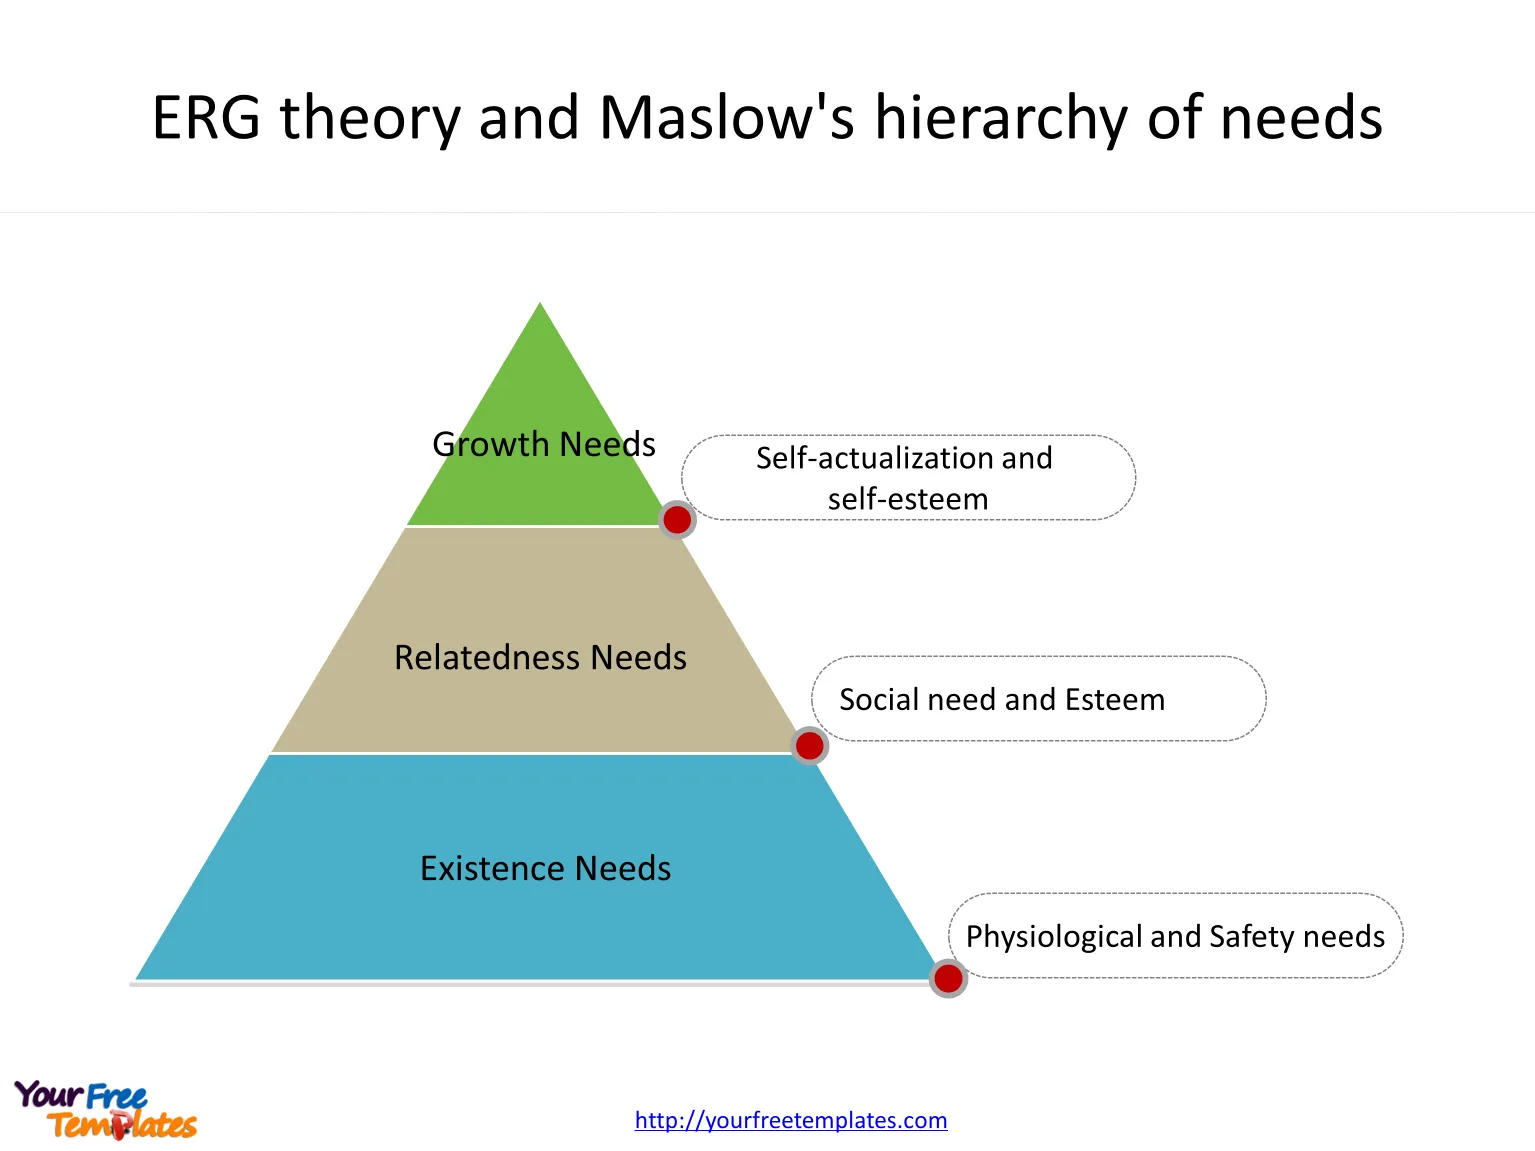 ERG theory fitted into Maslow’s hierarchy of needs